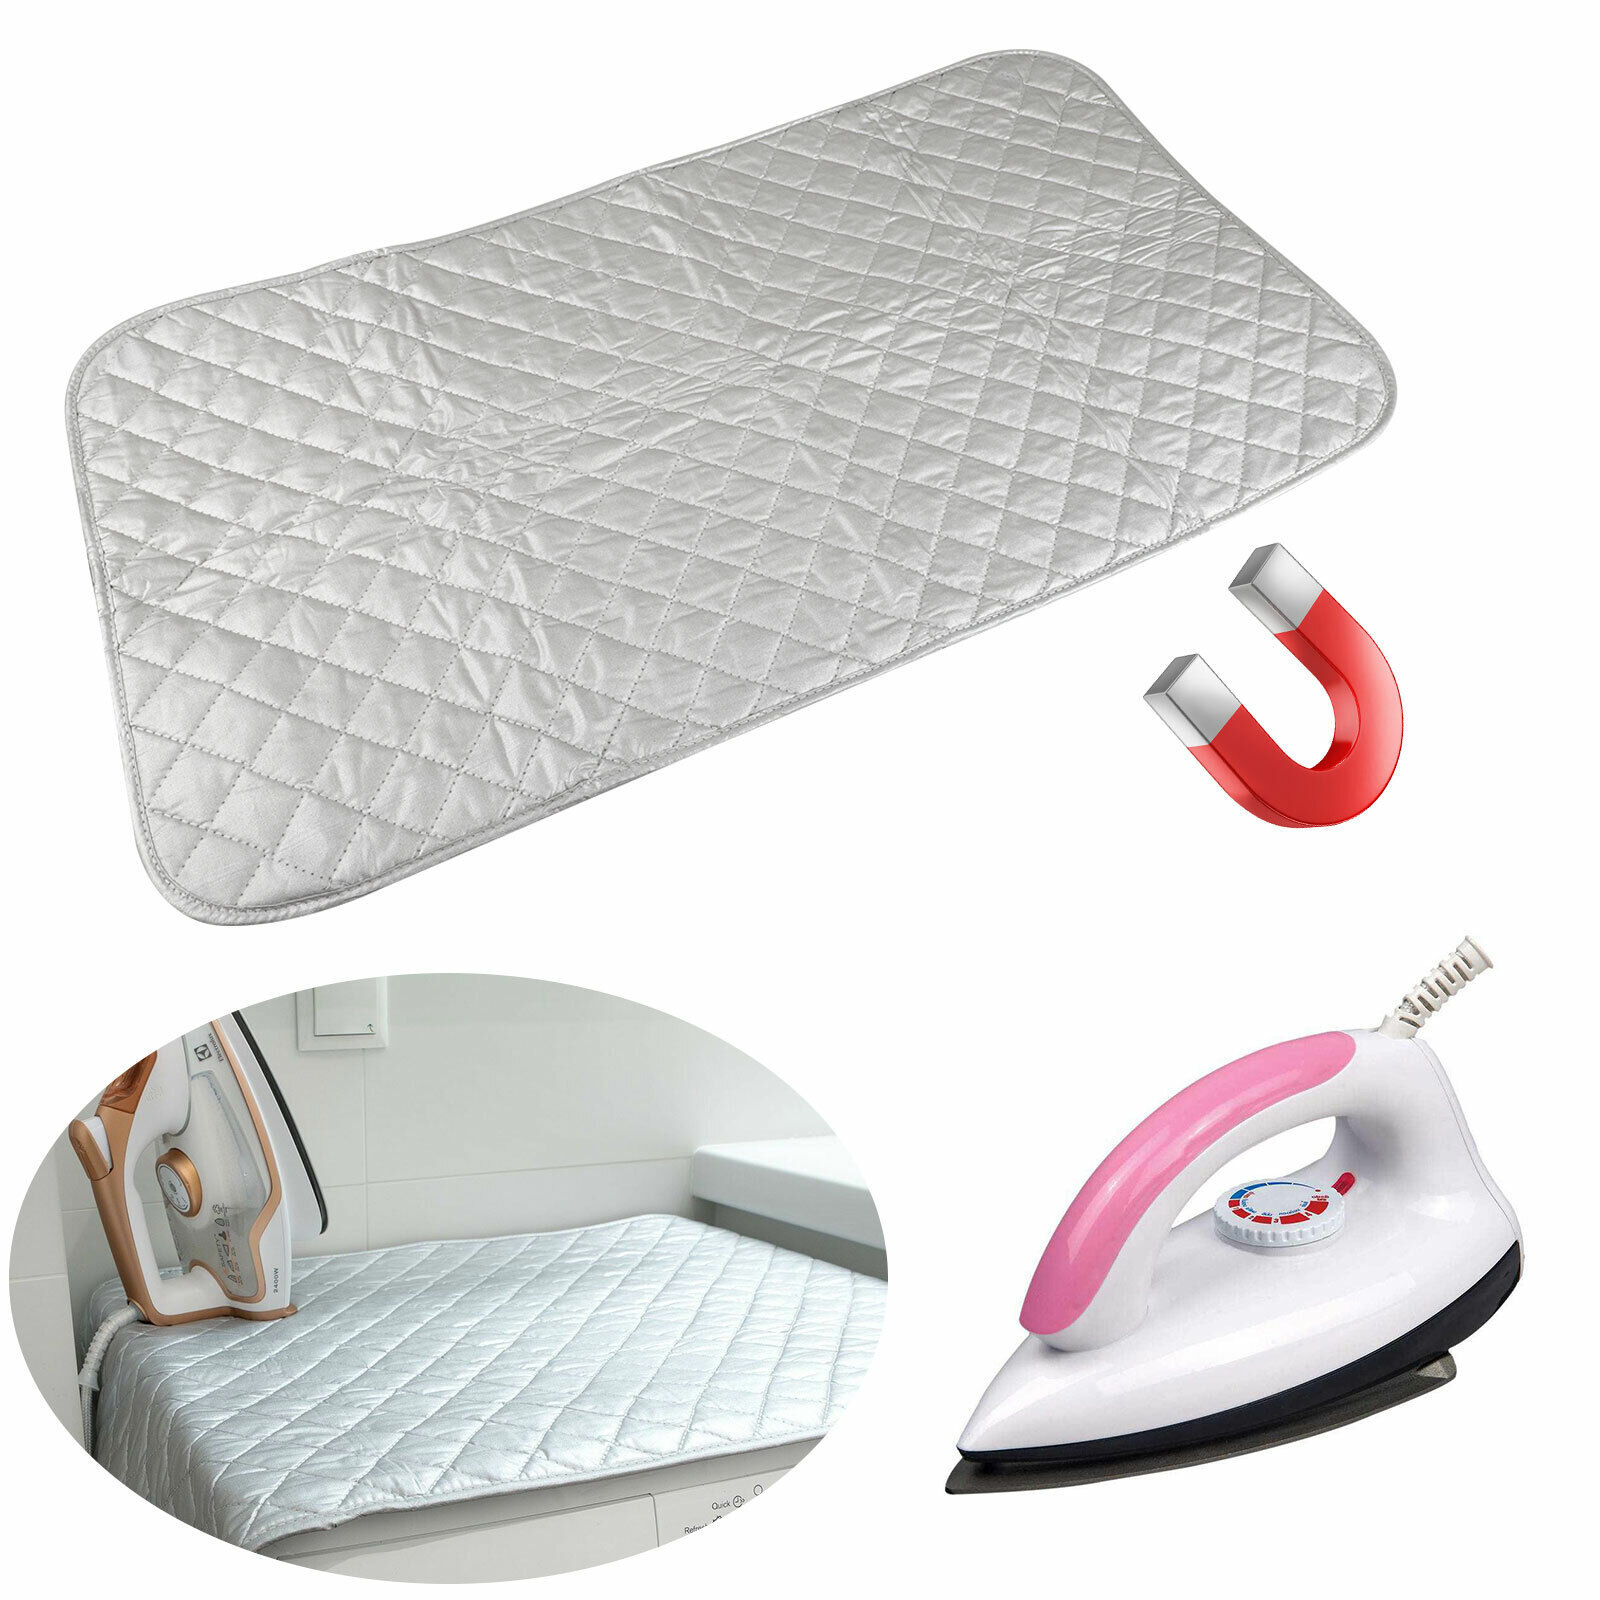 Portable Ironing Mat Blanket Magnetic Heat Resistant Foldable Dr